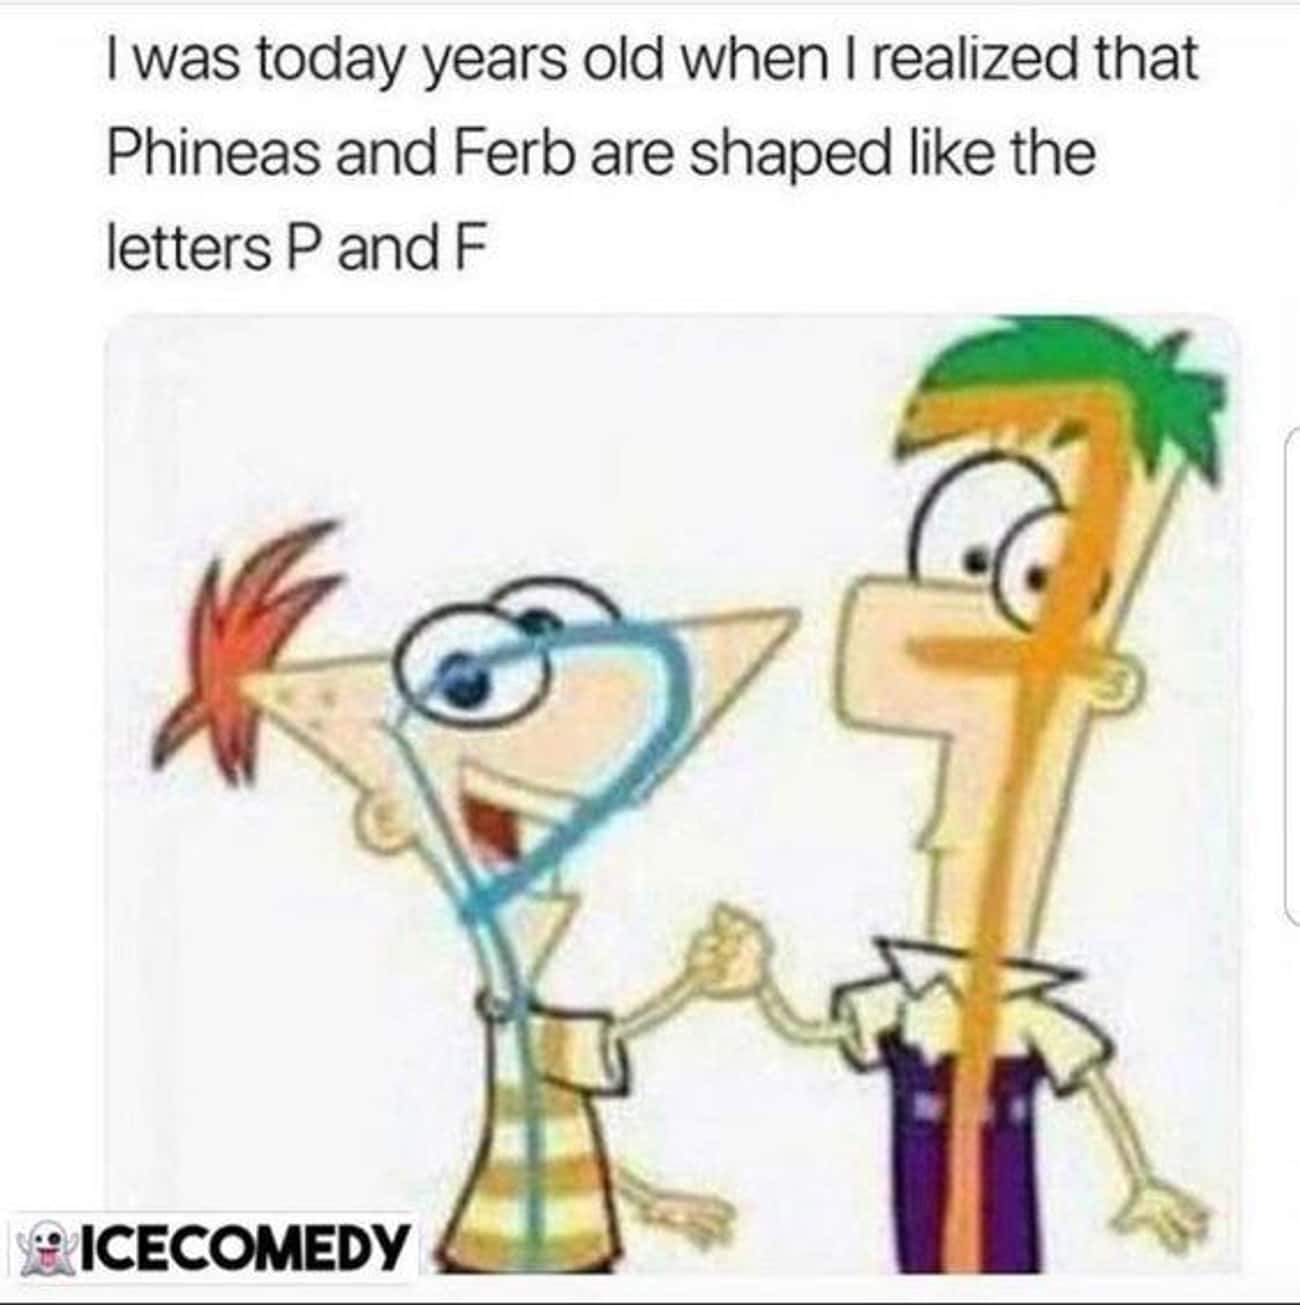 Phineas And Ferb Makes So Much Sense For Their Names